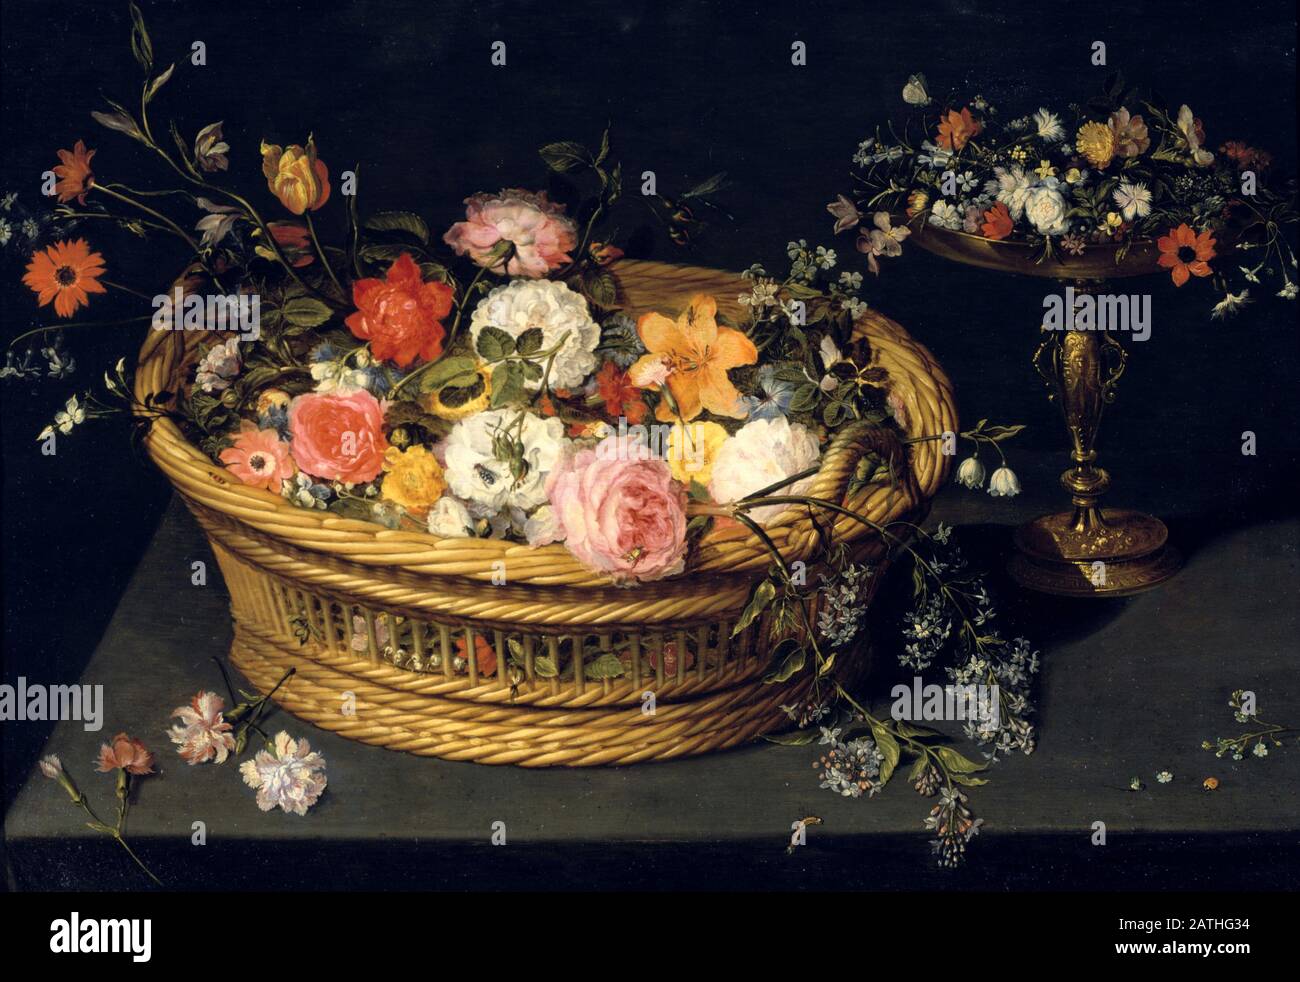 A Basket of Flowers by Jan Brueghel the Younger (Flemish, 1601.1678). 1620s. Oil on wood New York, Metropolitan Museum of Art Stock Photo